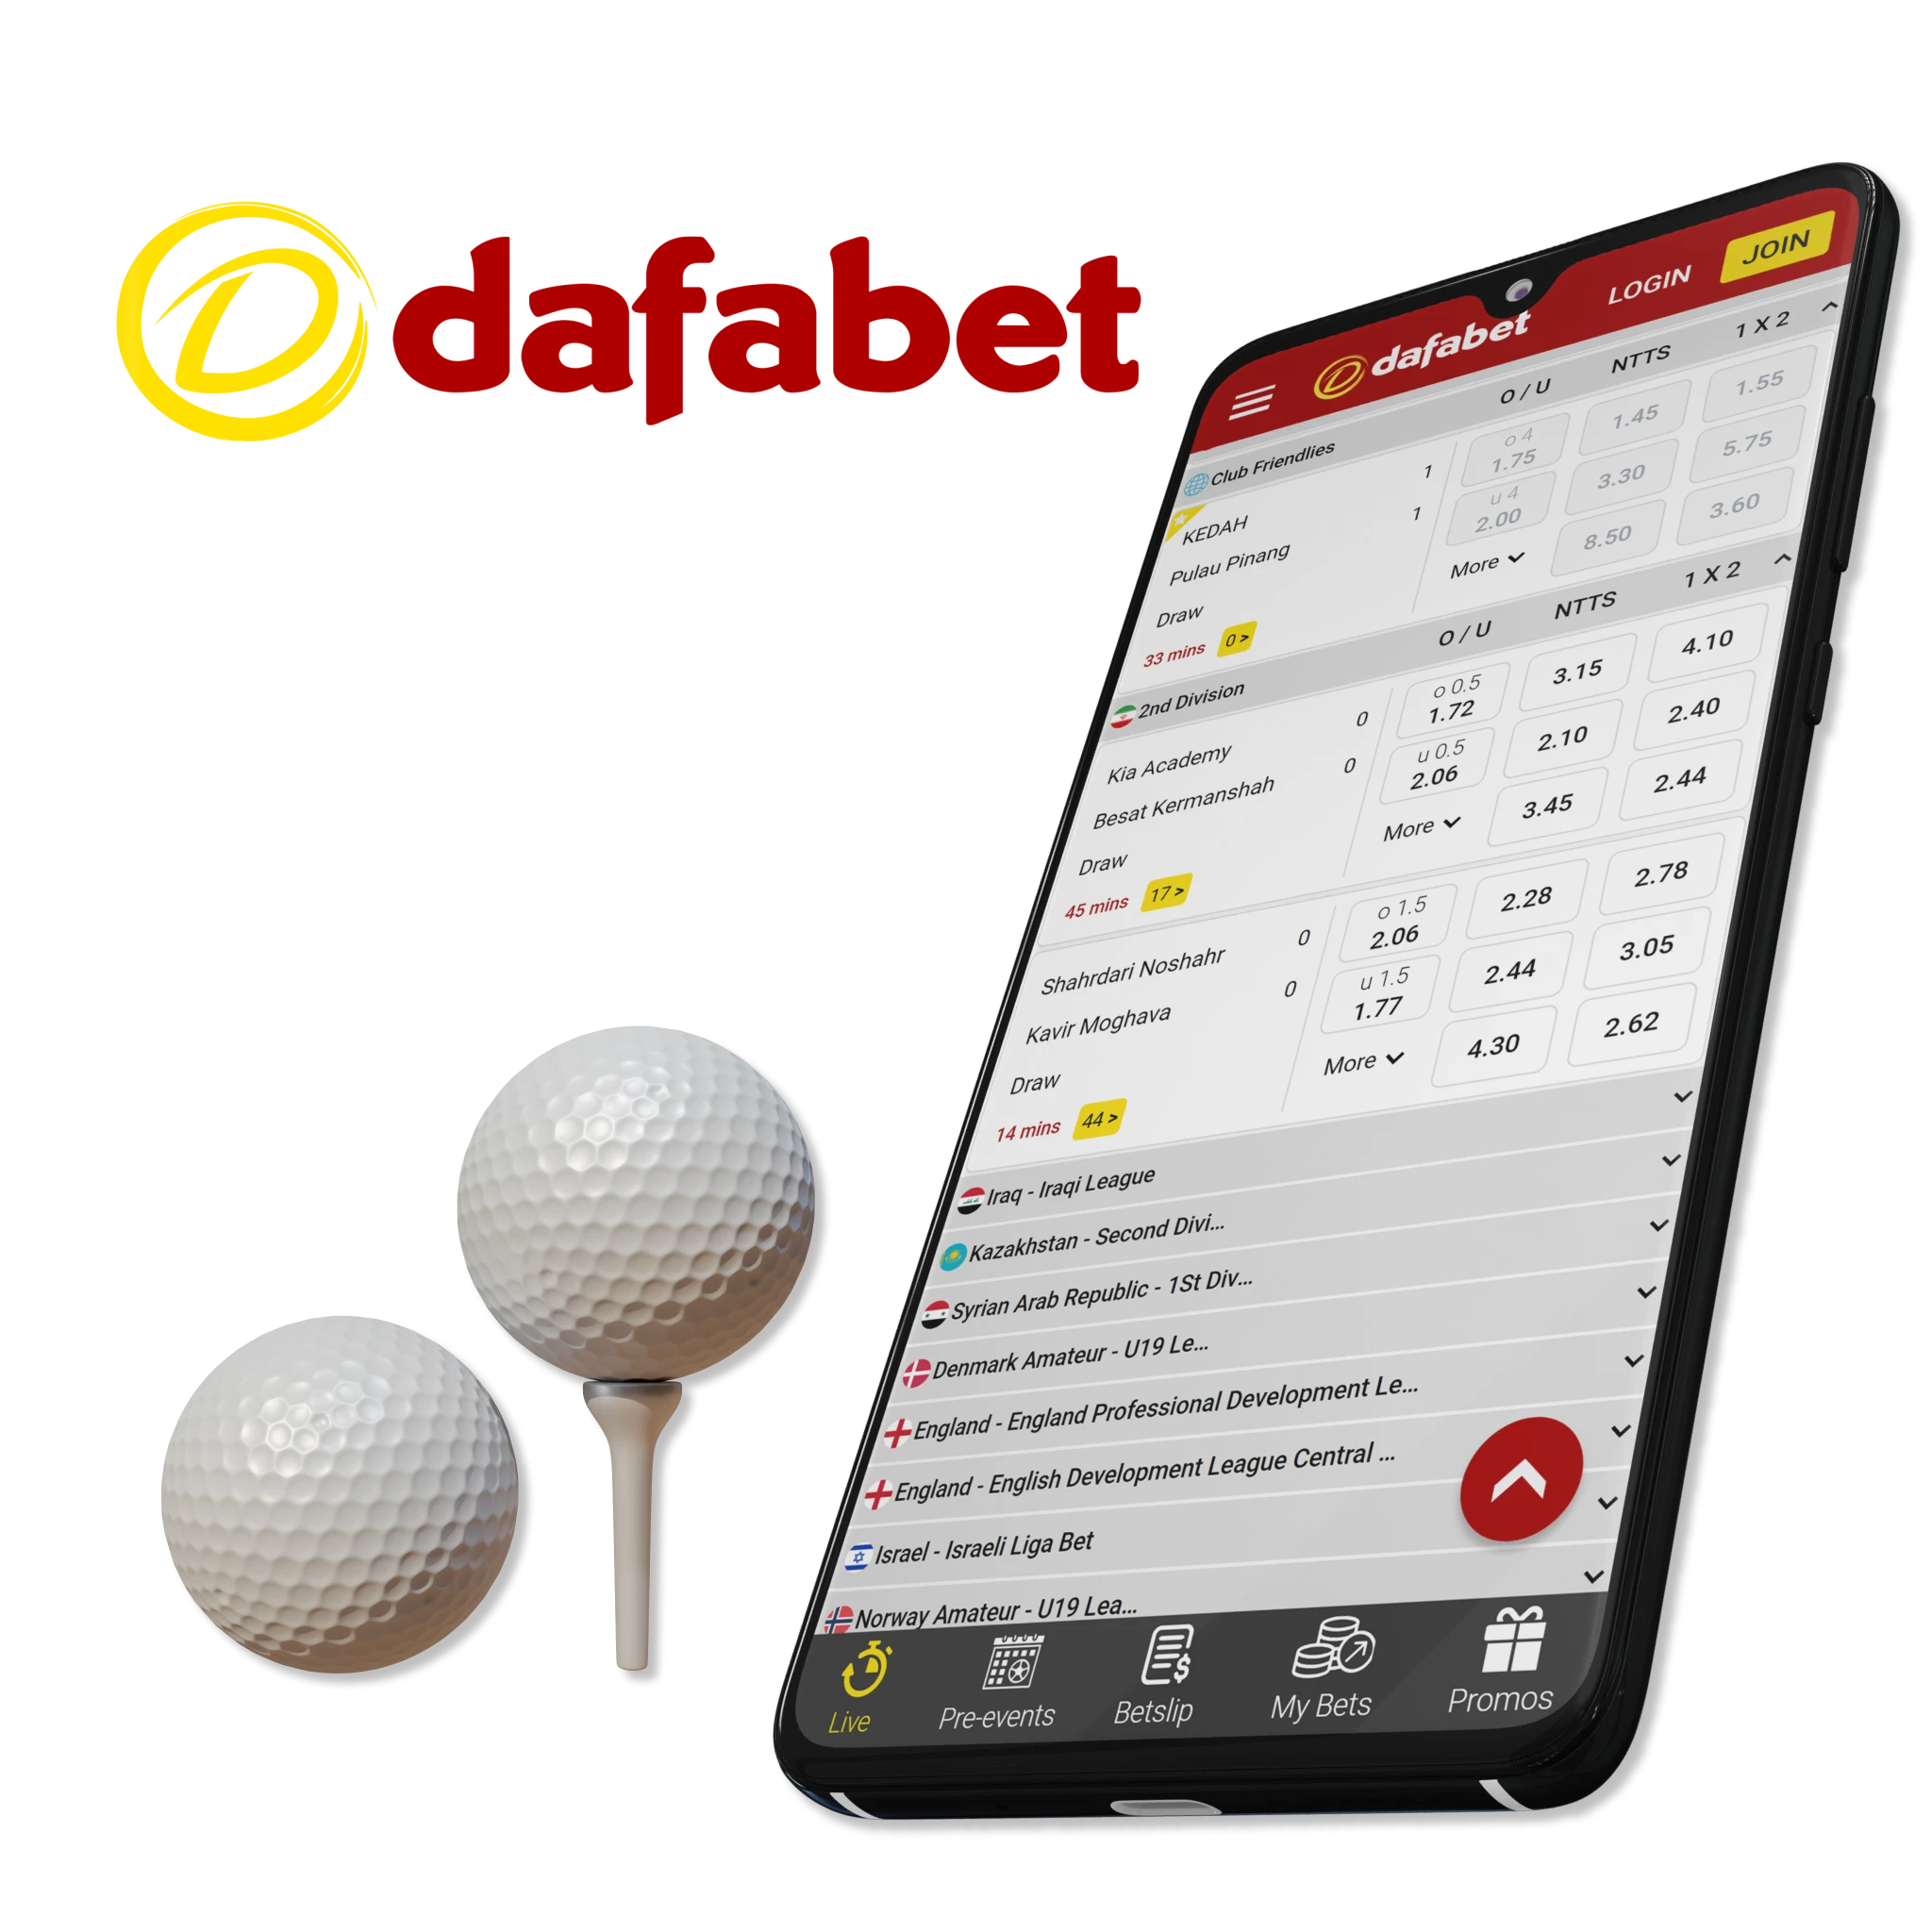 The Dafabet app provides various payment options for golf betting.